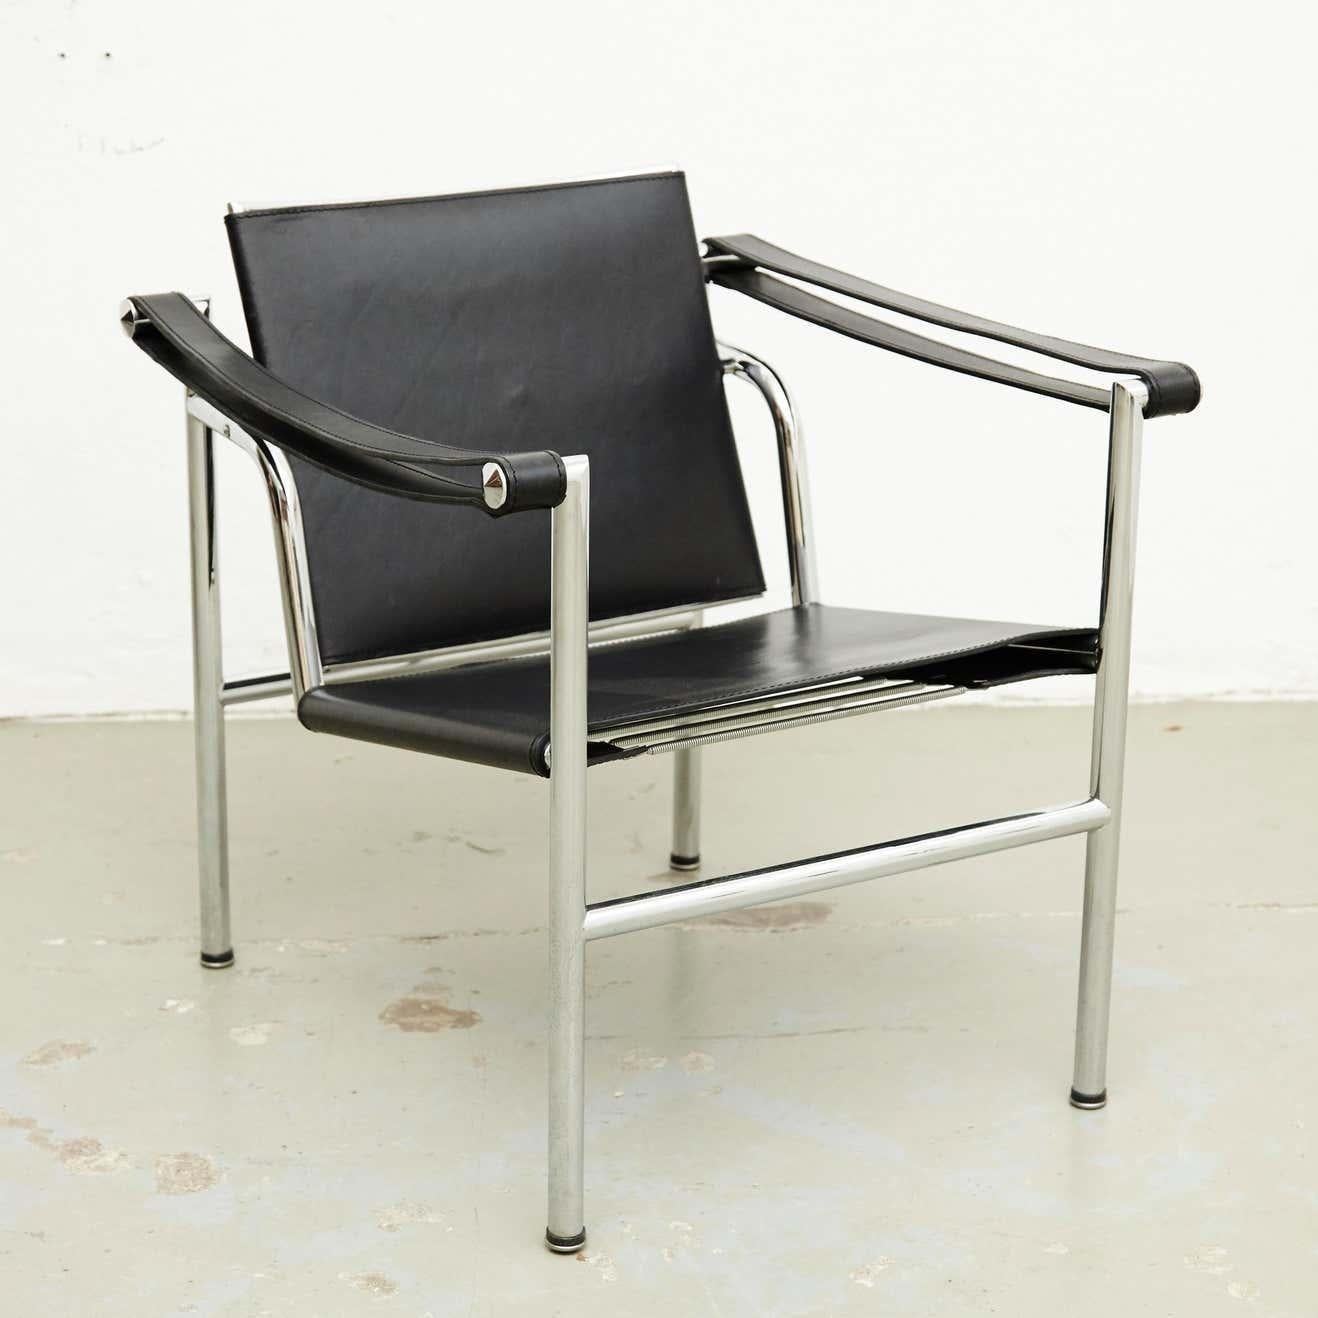 Le Corbusier, Pierre Jeanneret and Charlotte Perriand LC1 black leather lounge chair.
chromed steel.
By unknown manufacturer.
Manufactured on the late 20th Century.

In good original condition with minor wear consistent of age and use,